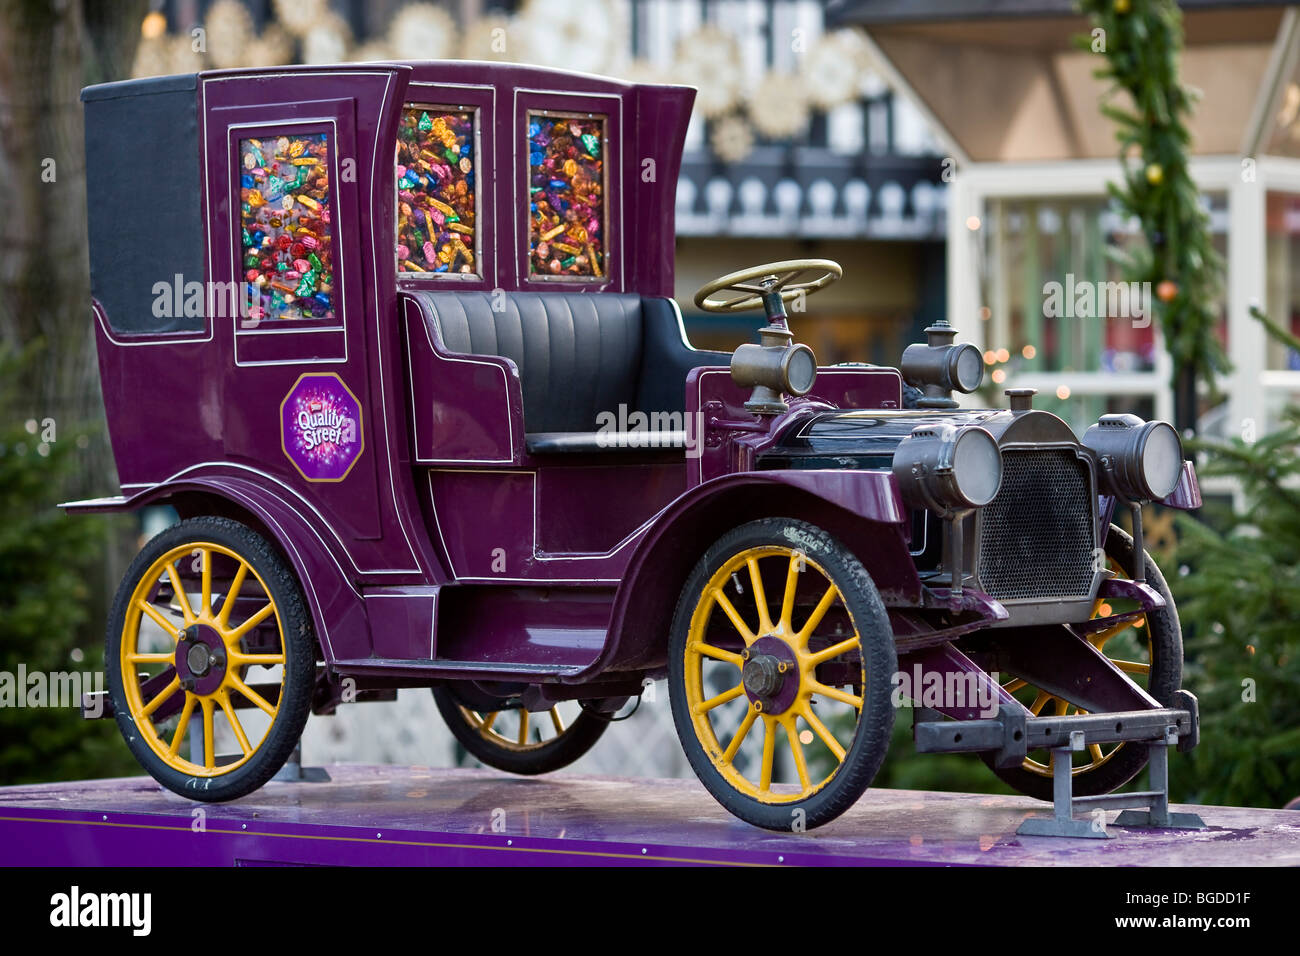 Vintage car filled with Quality Street sweets Stock Photo